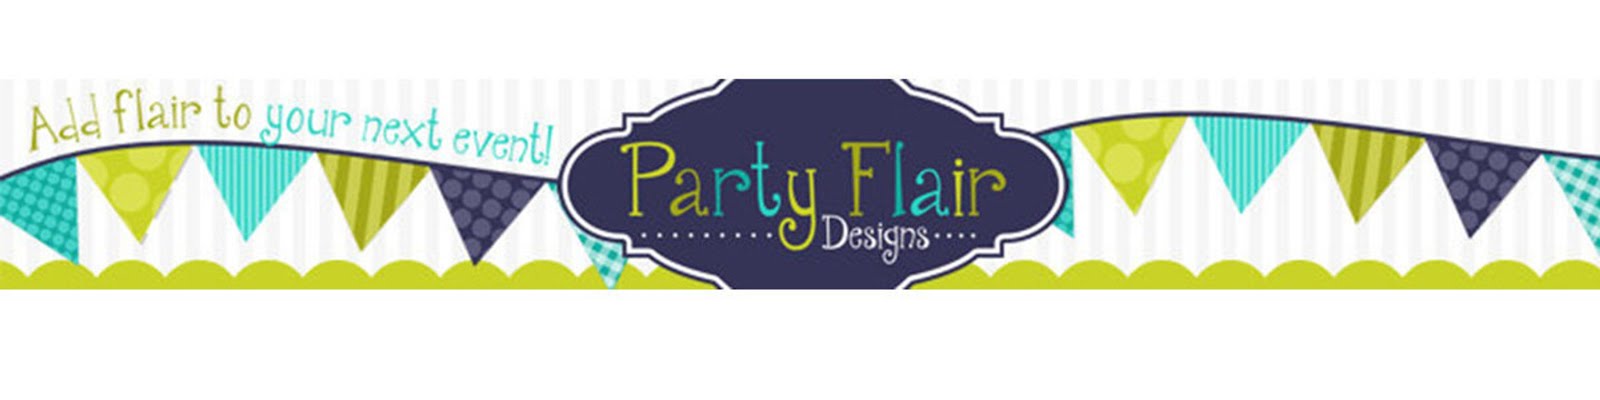 Party Flair Designs